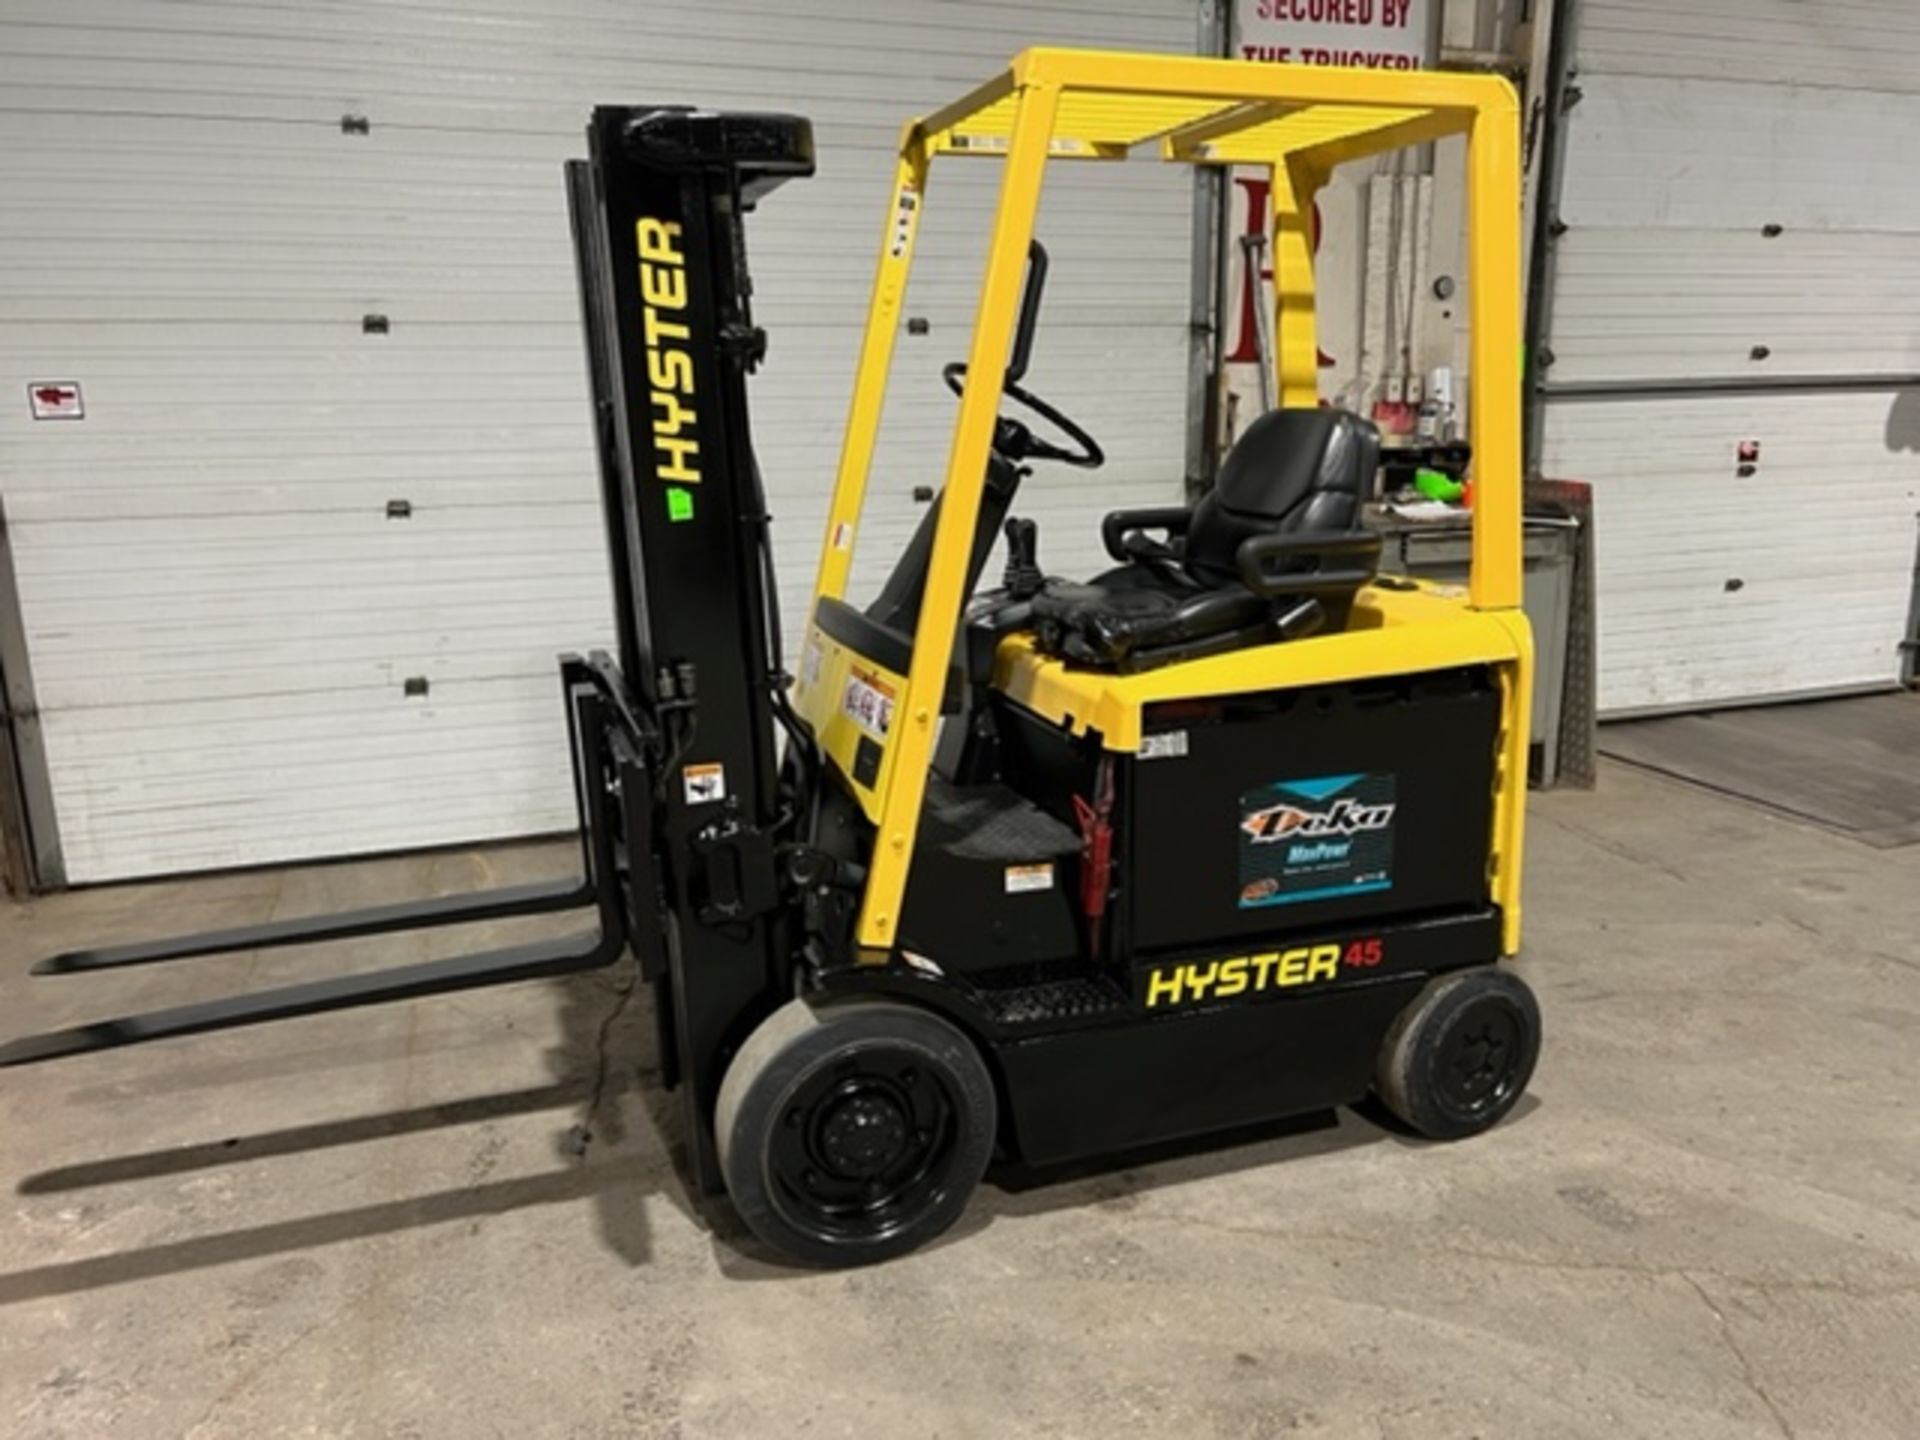 NICE 2008 Hyster model 45 - 4,500lbs Capacity Forklift Electric with Sideshift Option of